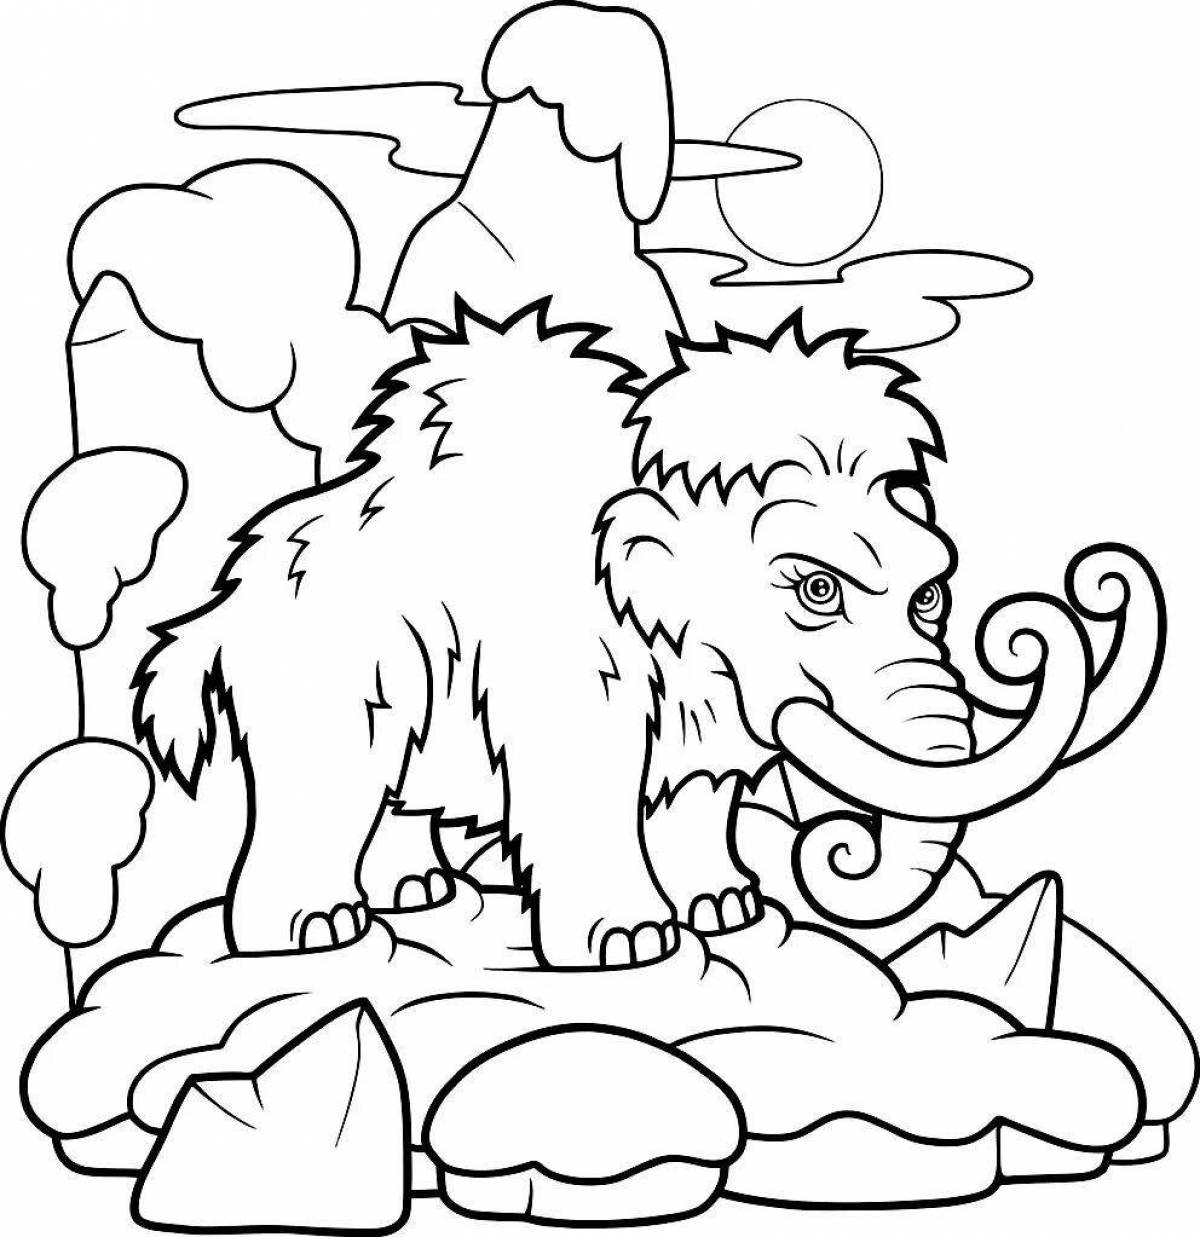 Fun coloring mammoth for kids